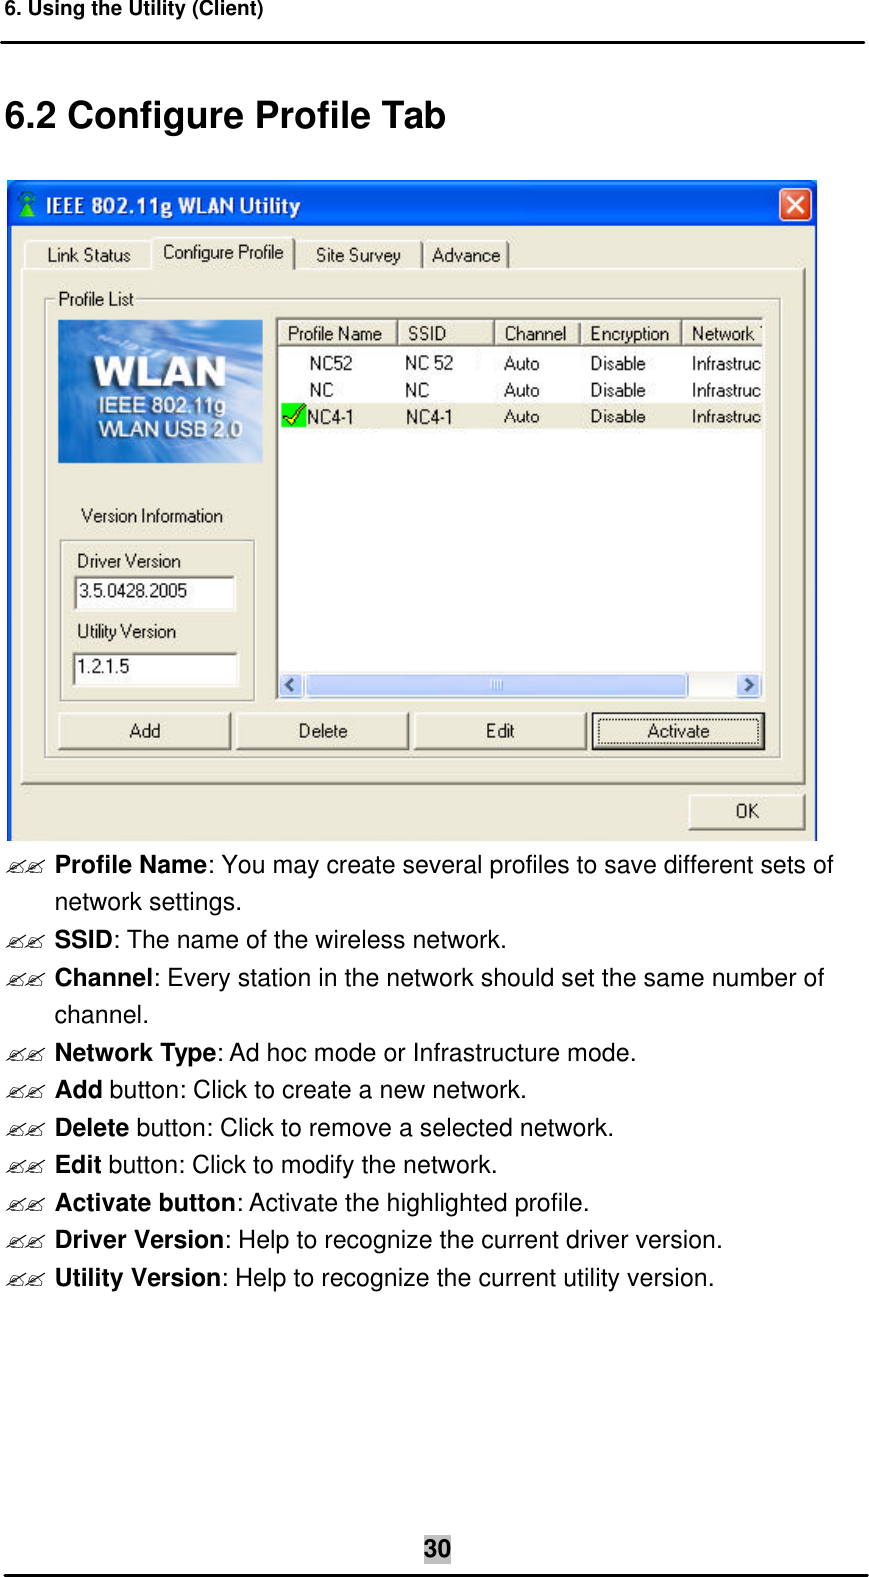 6. Using the Utility (Client)  306.2 Configure Profile Tab   ?? Profile Name: You may create several profiles to save different sets of network settings. ?? SSID: The name of the wireless network. ?? Channel: Every station in the network should set the same number of channel. ?? Network Type: Ad hoc mode or Infrastructure mode. ?? Add button: Click to create a new network. ?? Delete button: Click to remove a selected network. ?? Edit button: Click to modify the network. ?? Activate button: Activate the highlighted profile. ?? Driver Version: Help to recognize the current driver version. ?? Utility Version: Help to recognize the current utility version. 